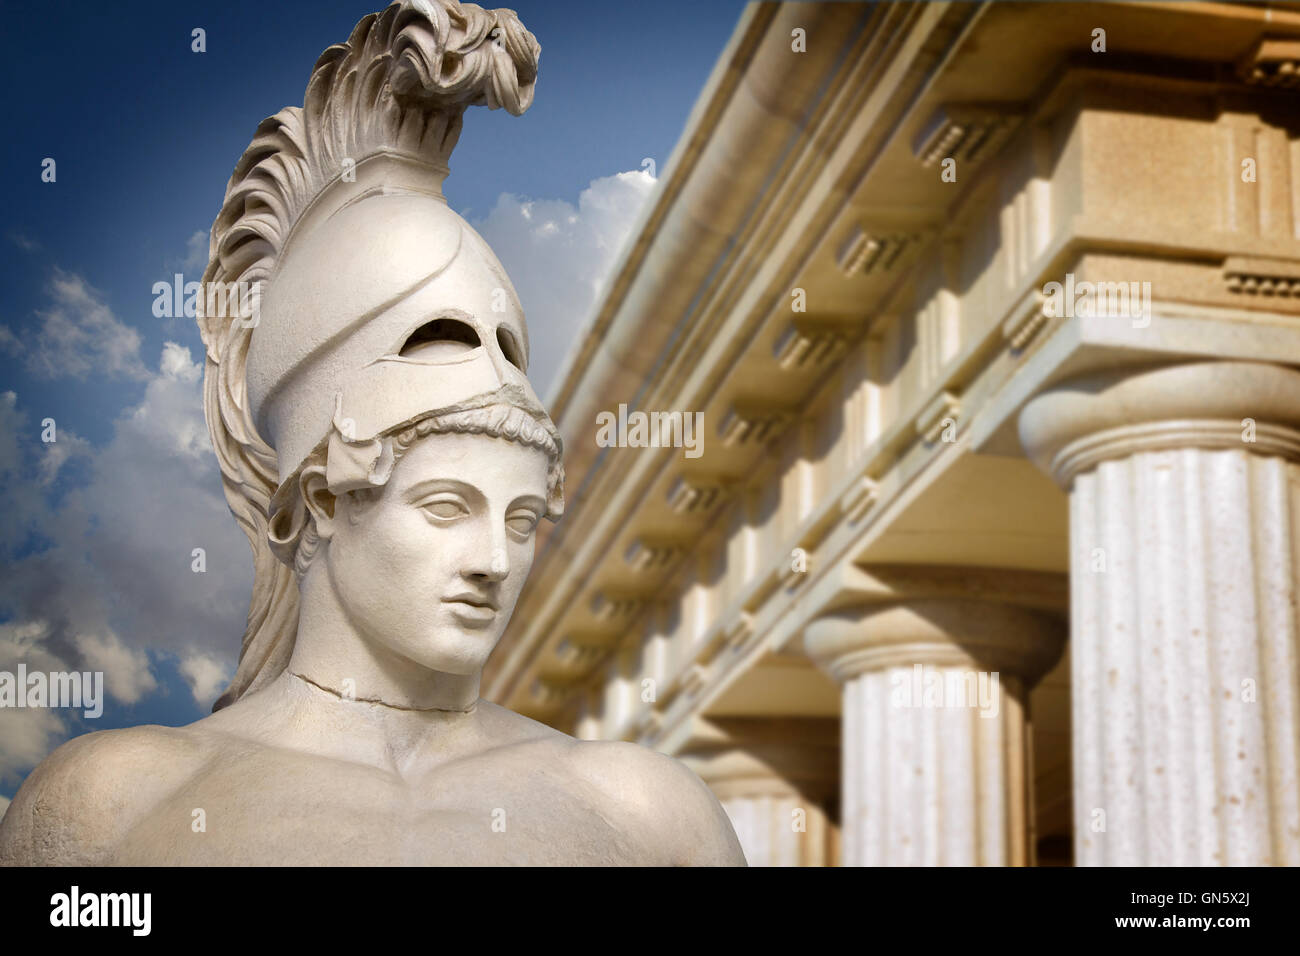 Bust of the greek statesman Pericles Stock Photo